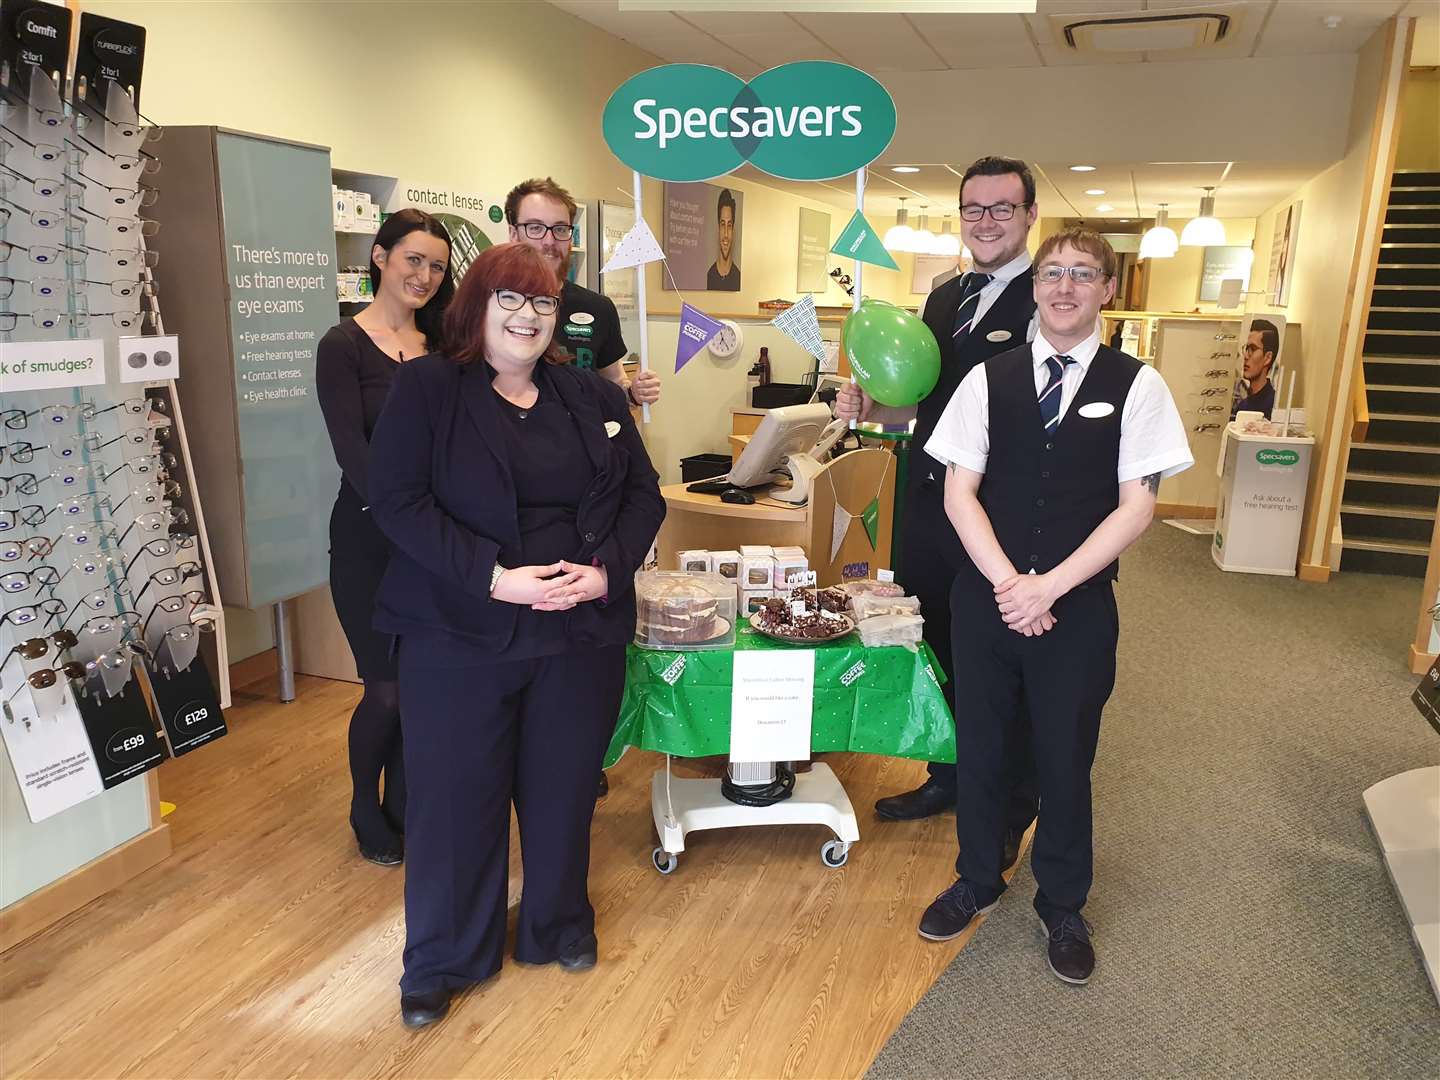 Staff at Specsavers in Inverness held a bake sale in aid of Macmillan Cancer Support.